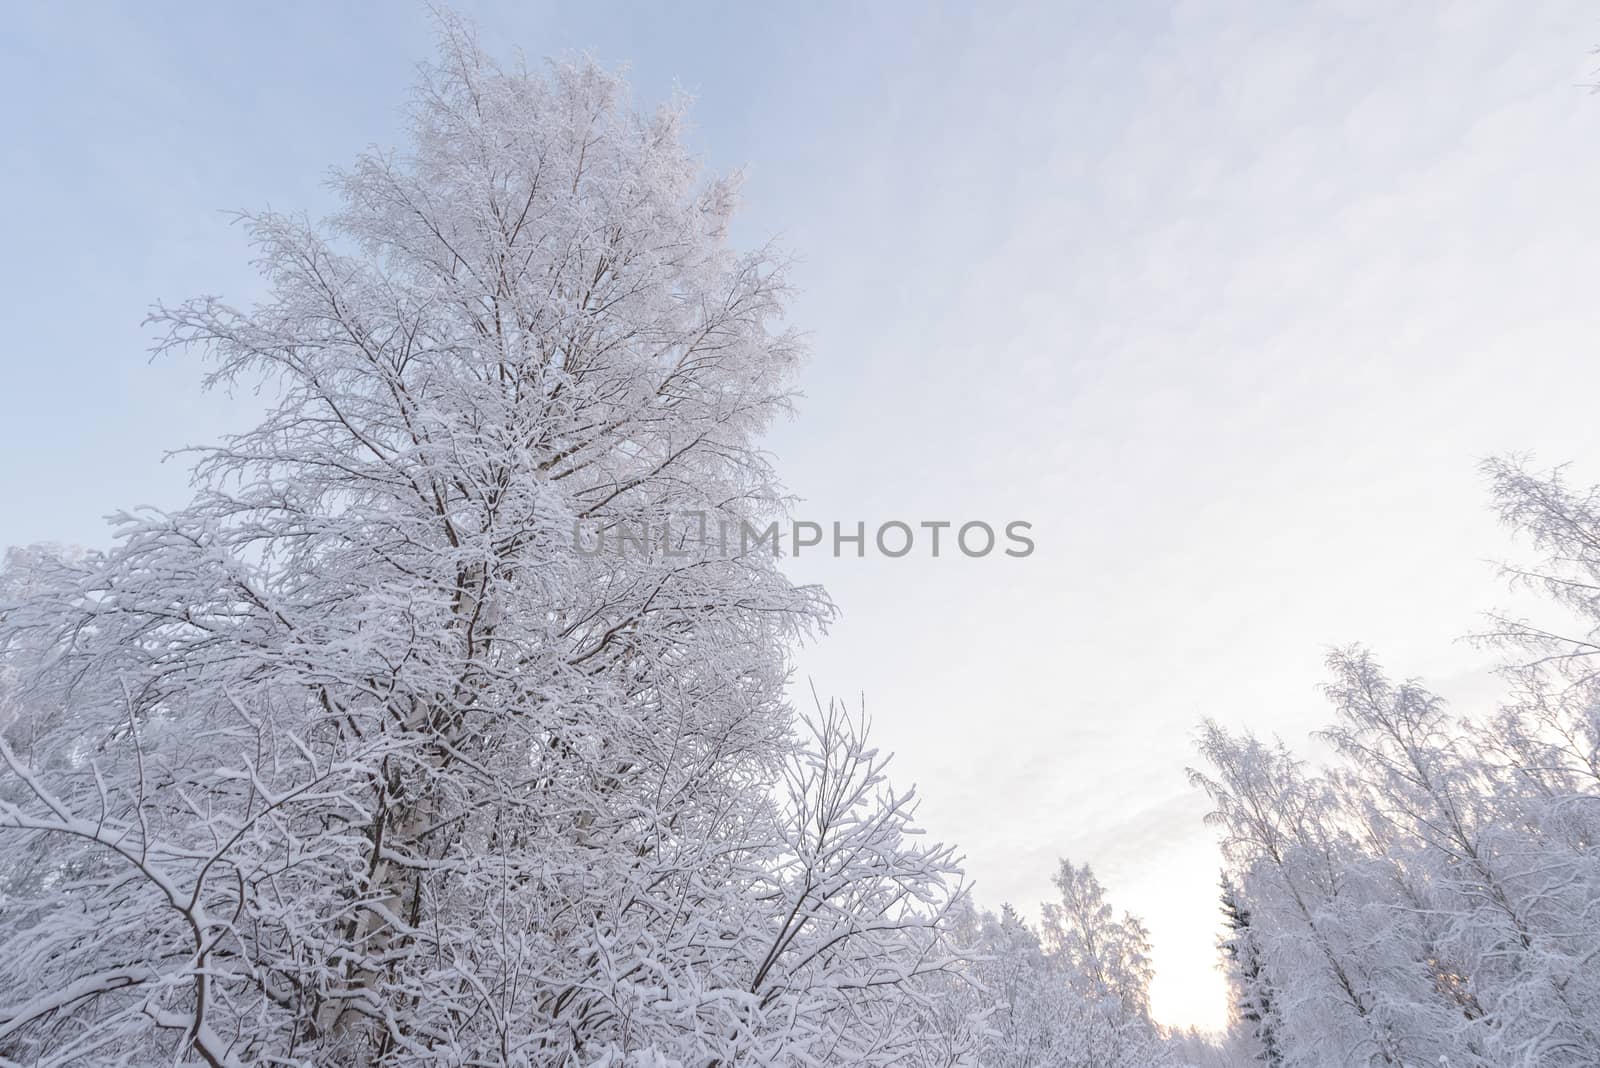 The forest has covered with heavy snow in winter season at Lapla by animagesdesign